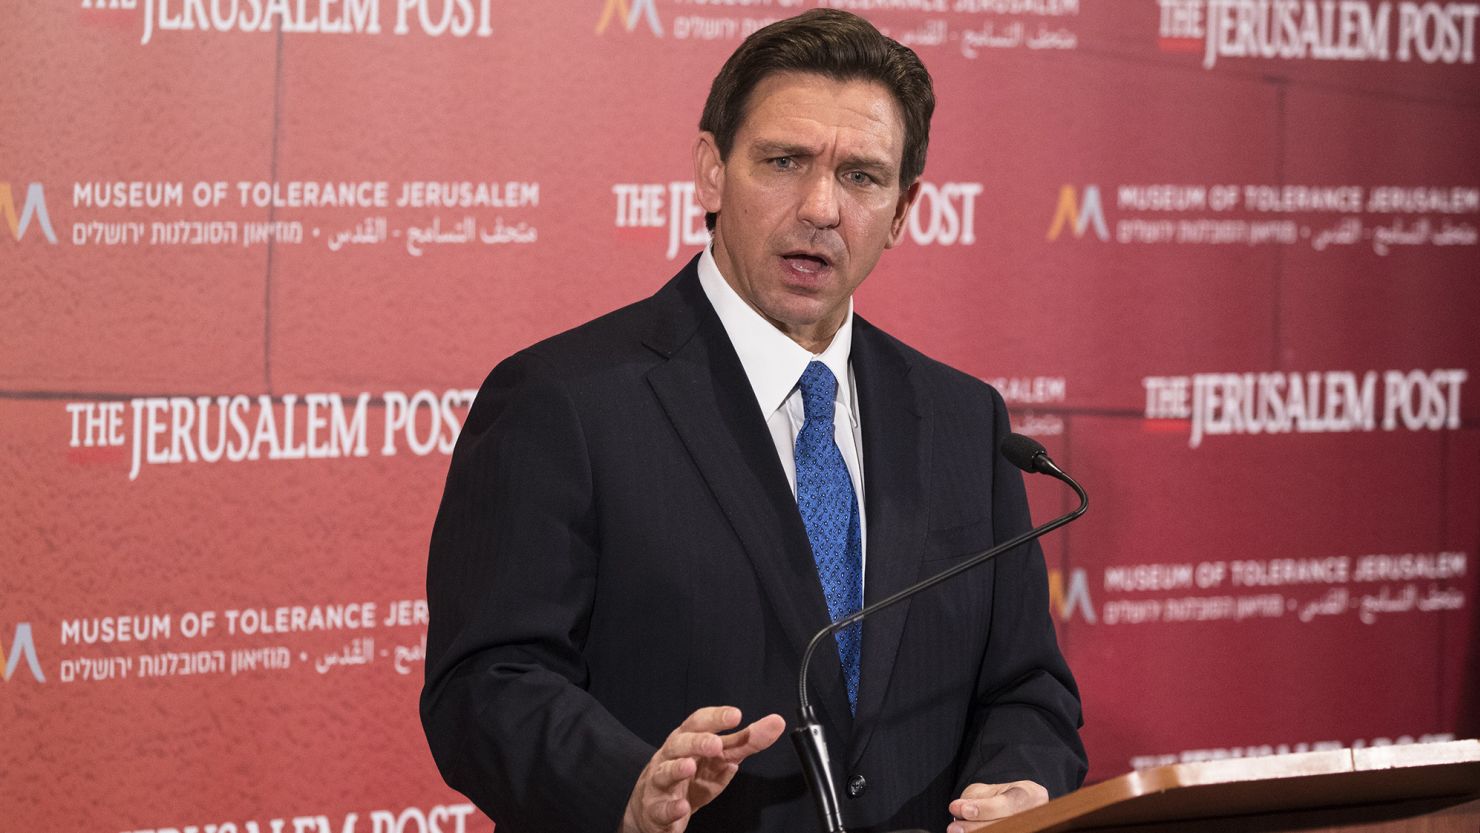 Florida Gov. Ron DeSantis speaks to the press during a news conference at the Museum of Tolerance on April 27, 2023 in Jerusalem.